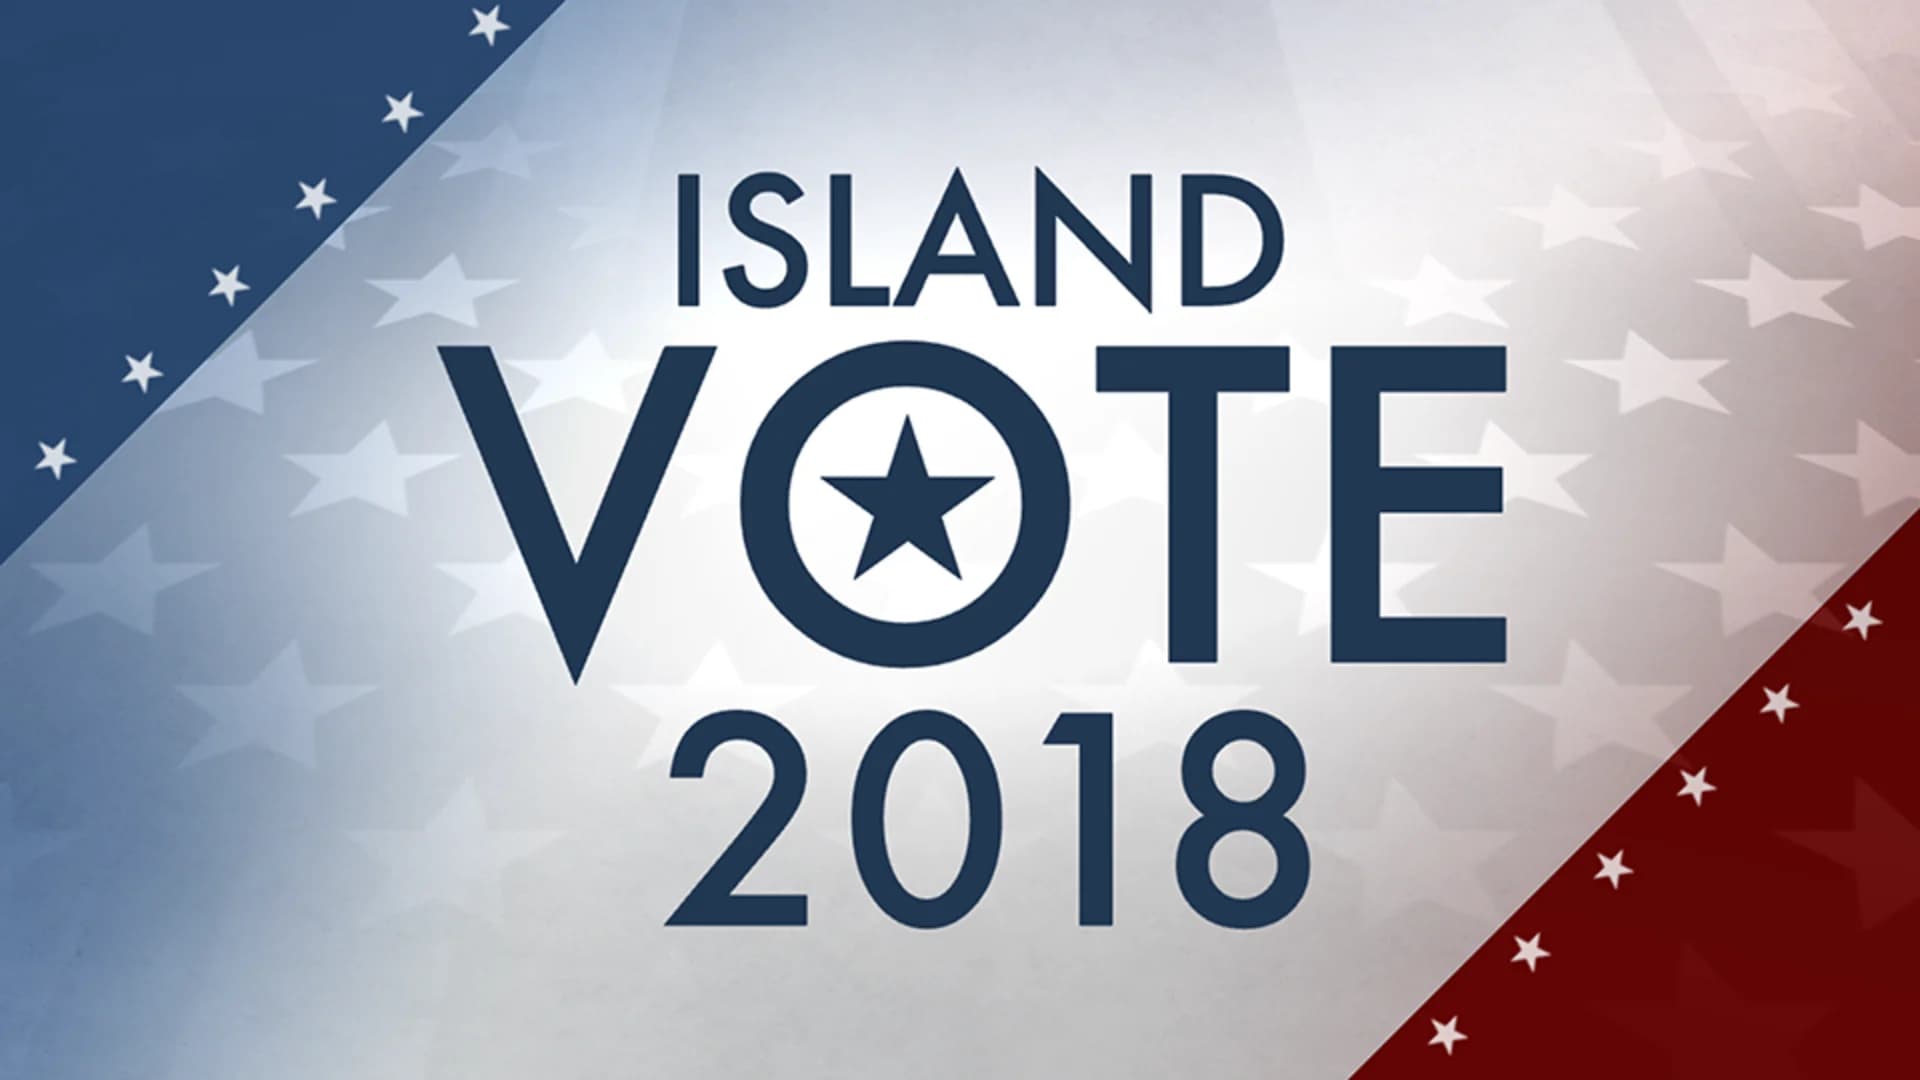 Island Vote 2018 - Complete Election Results